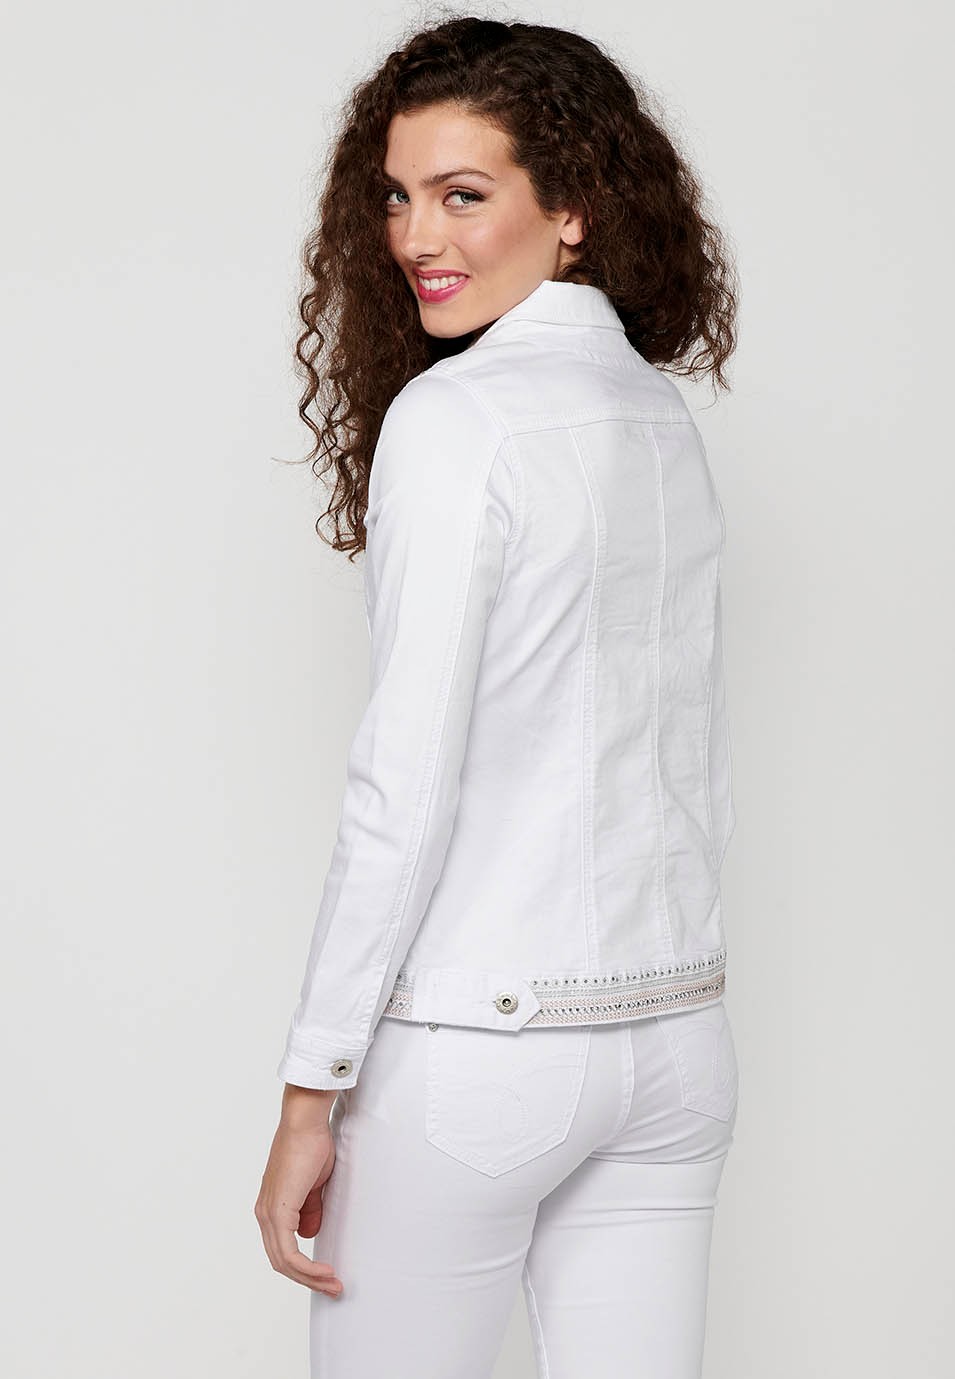 Denim Jacket with Button Front Closure and Shirt Collar with Floral Embroidery on the Shoulders and with White Pockets for Women 7